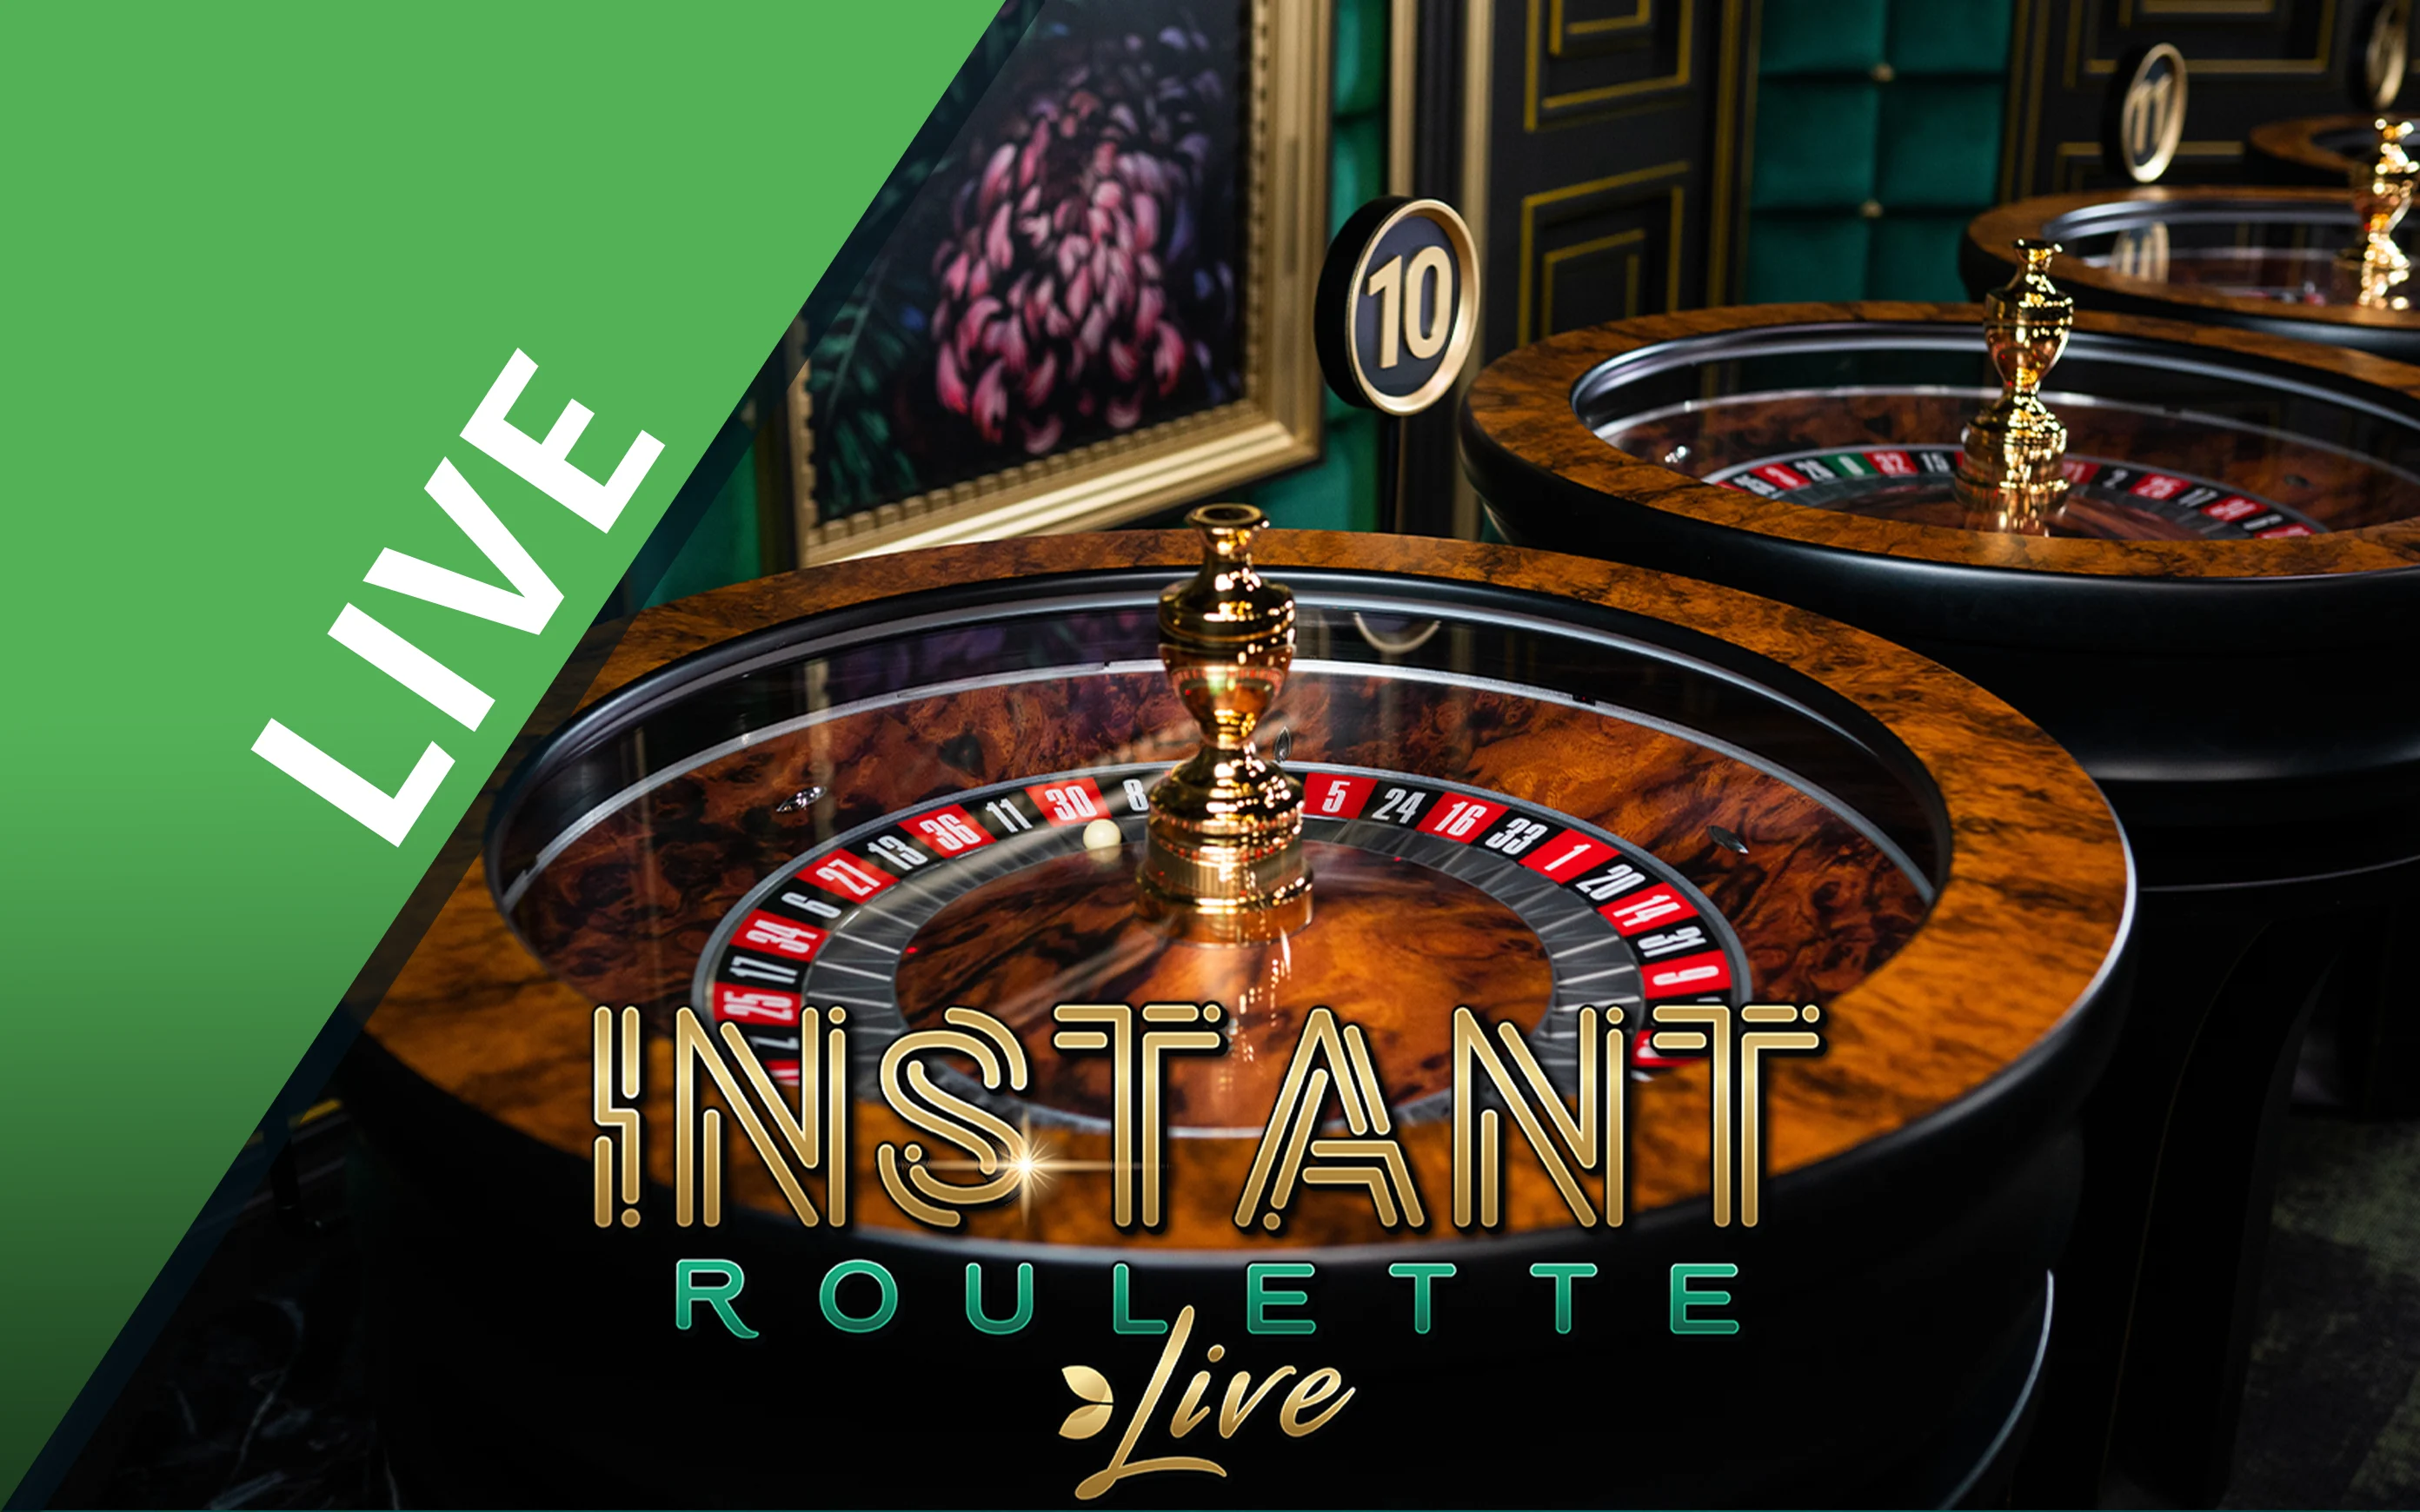 Play Instant Roulette on Starcasino.be online casino